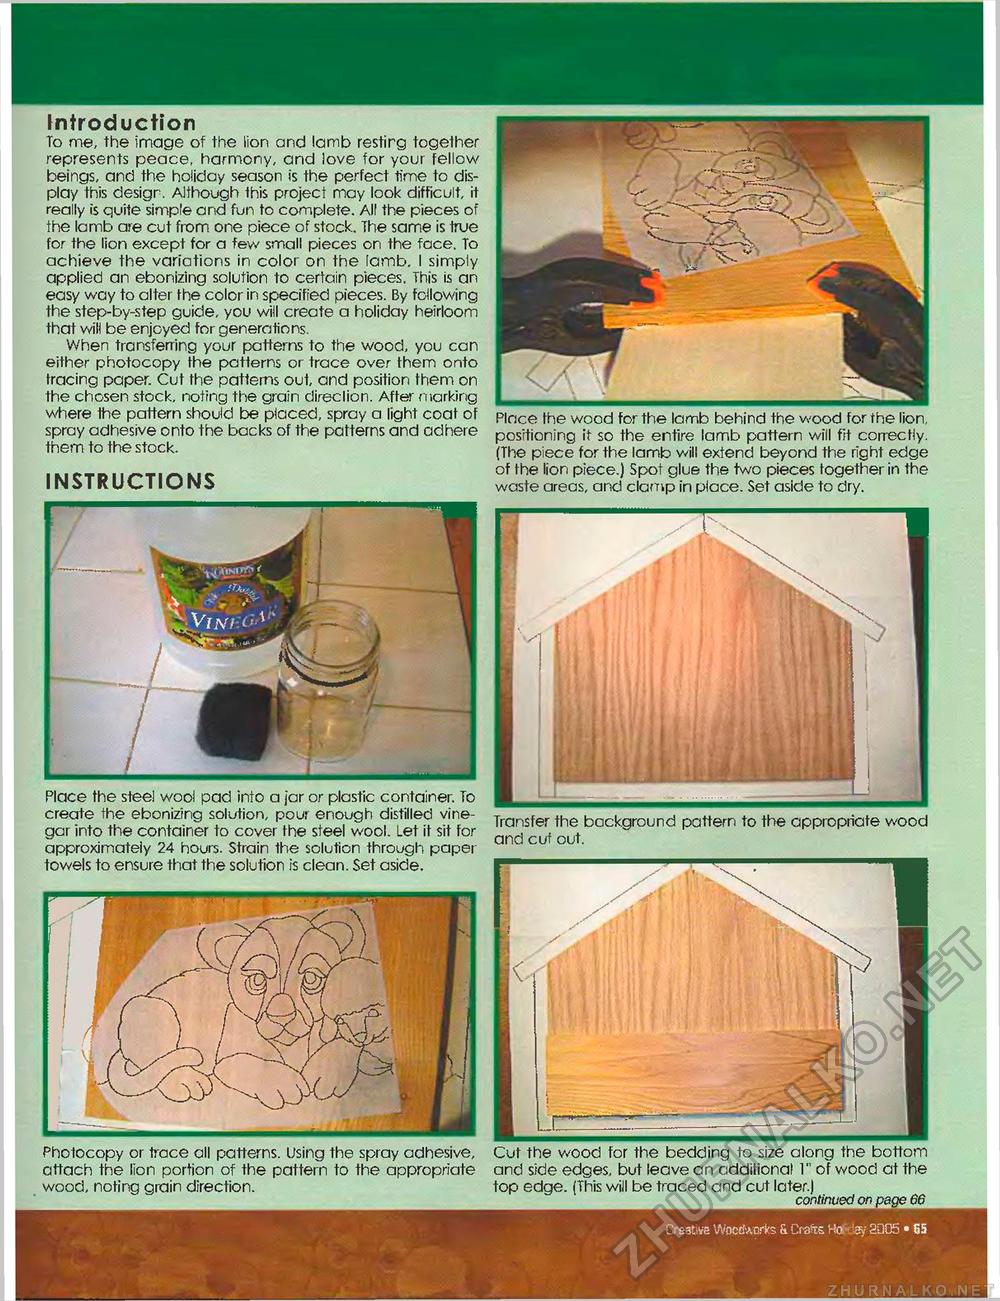 Creative Woodworks  & crafts-125-2007-Holiday,  65